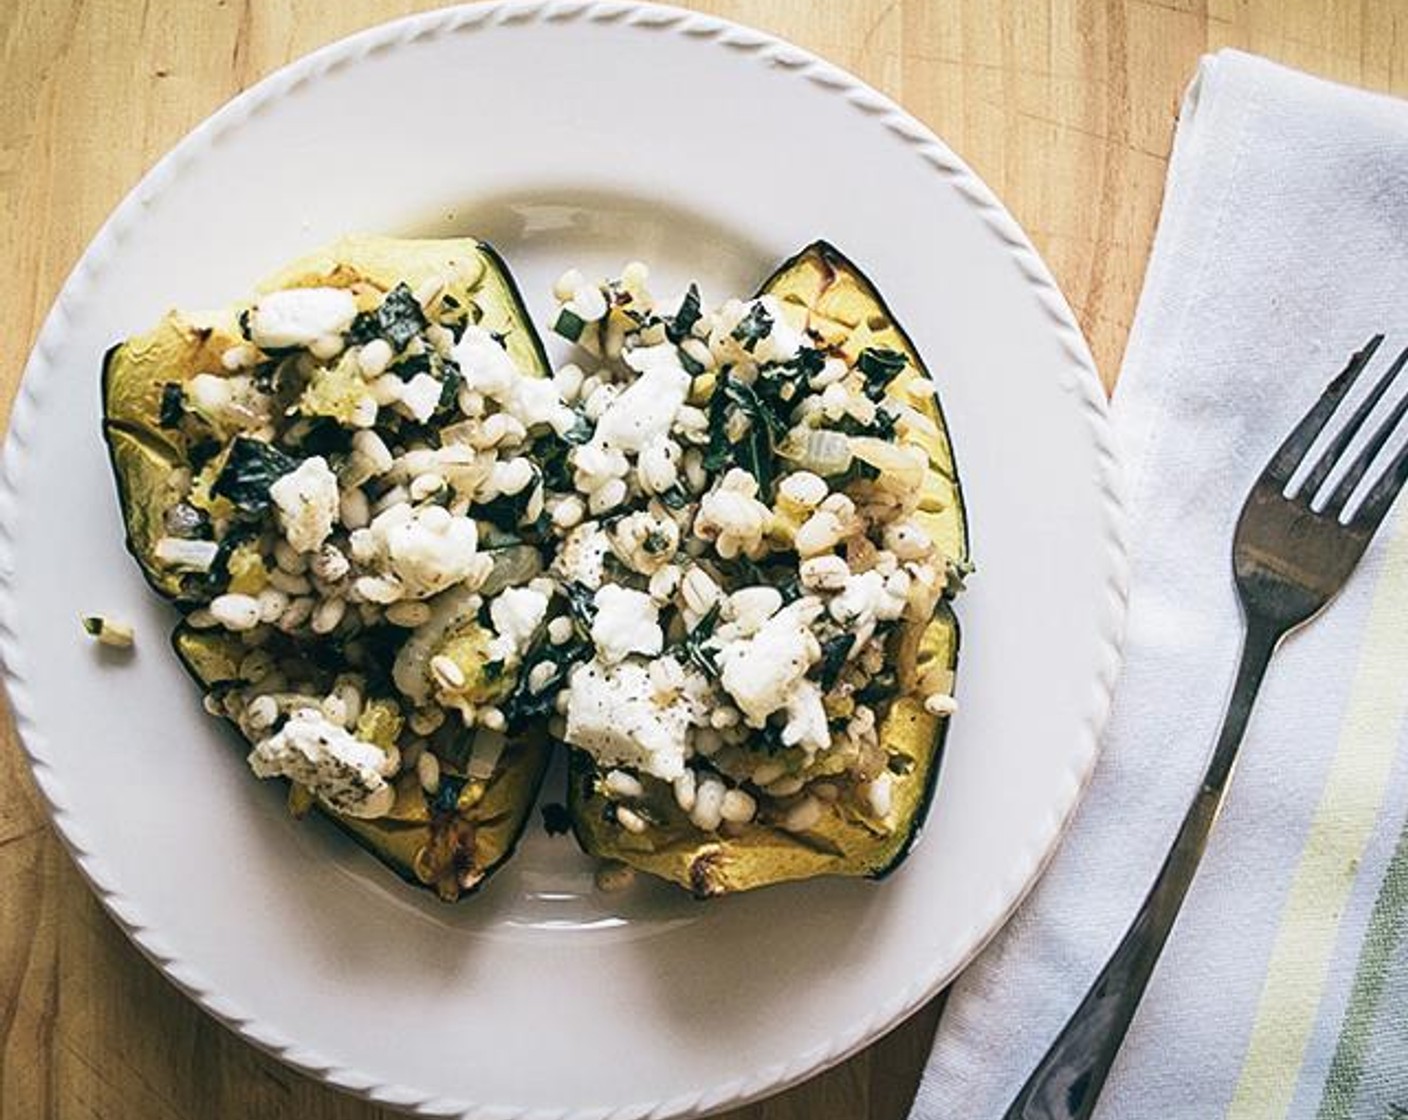 Acorn Squash with Barley and Goat Cheese